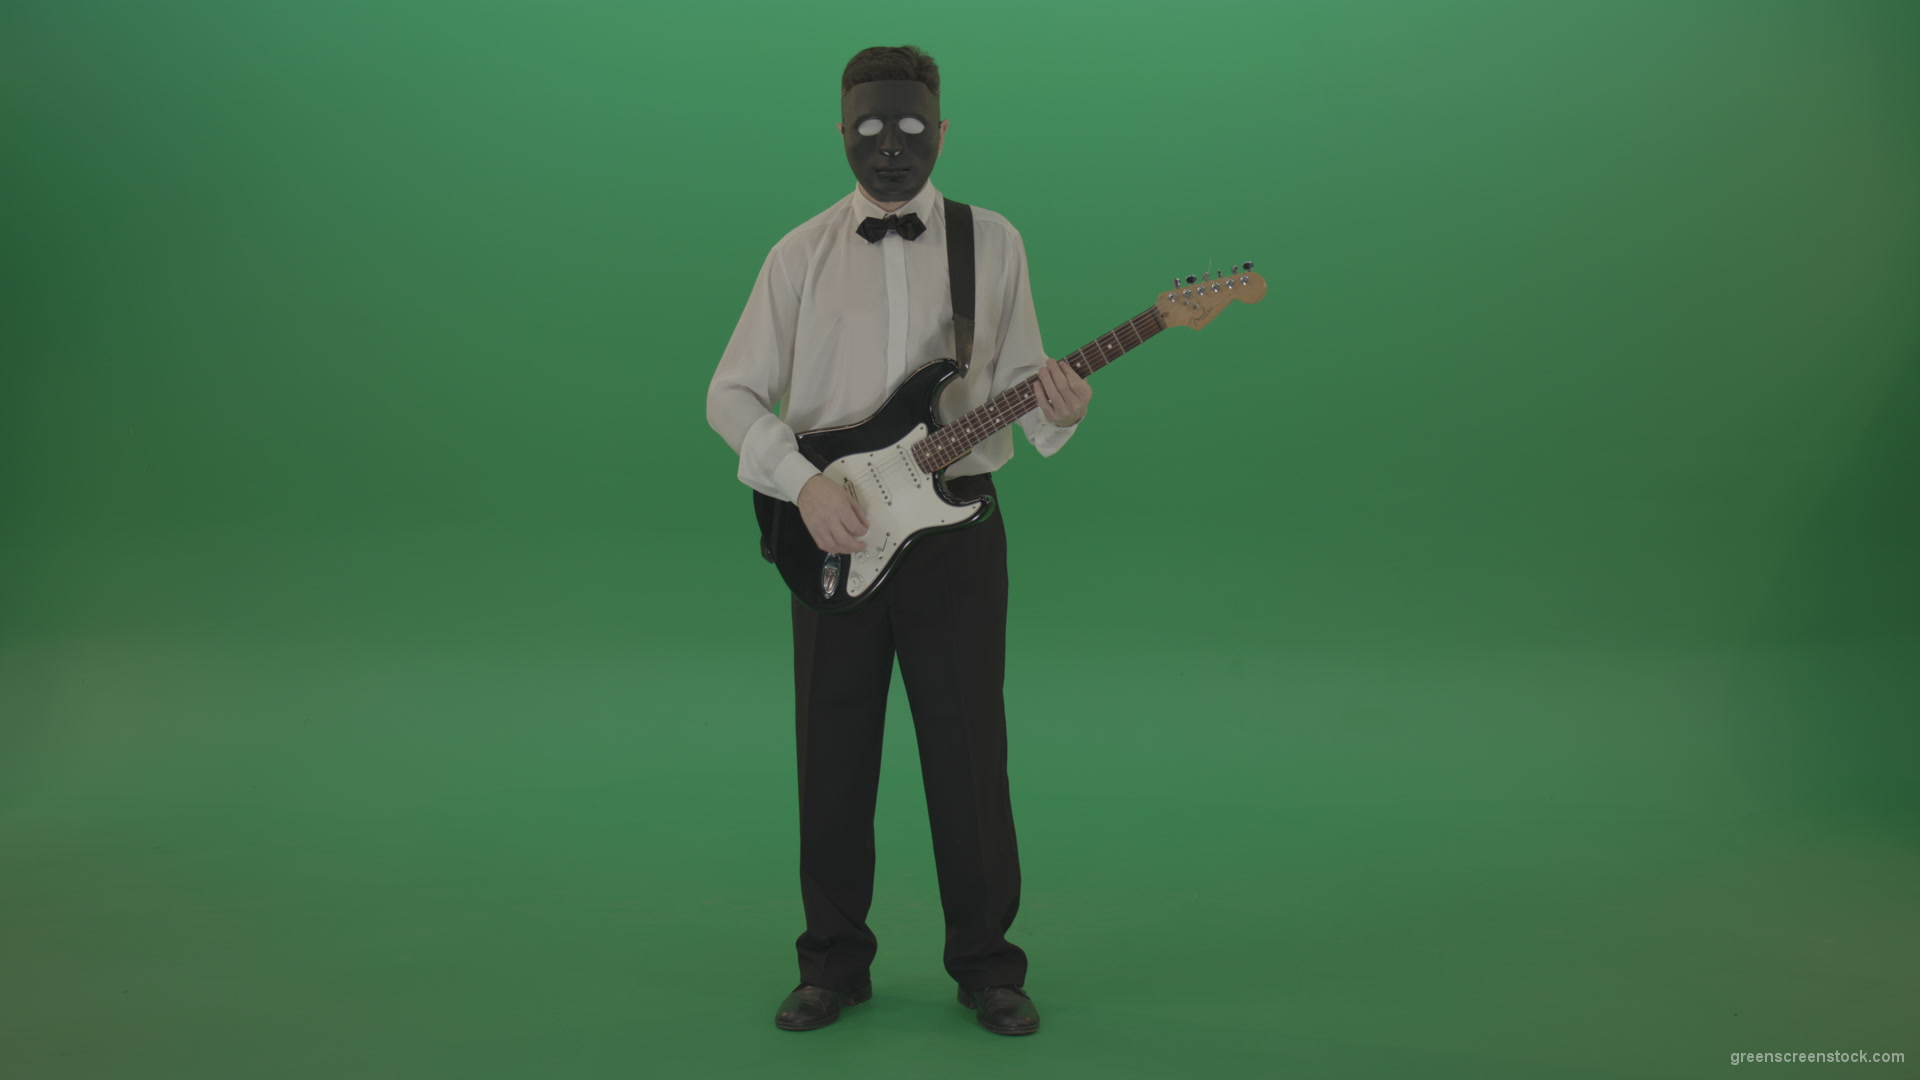 Classic-guitarist-in-white-shirt-play-guitar-in-mask-isolated-on-green-screen_008 Green Screen Stock